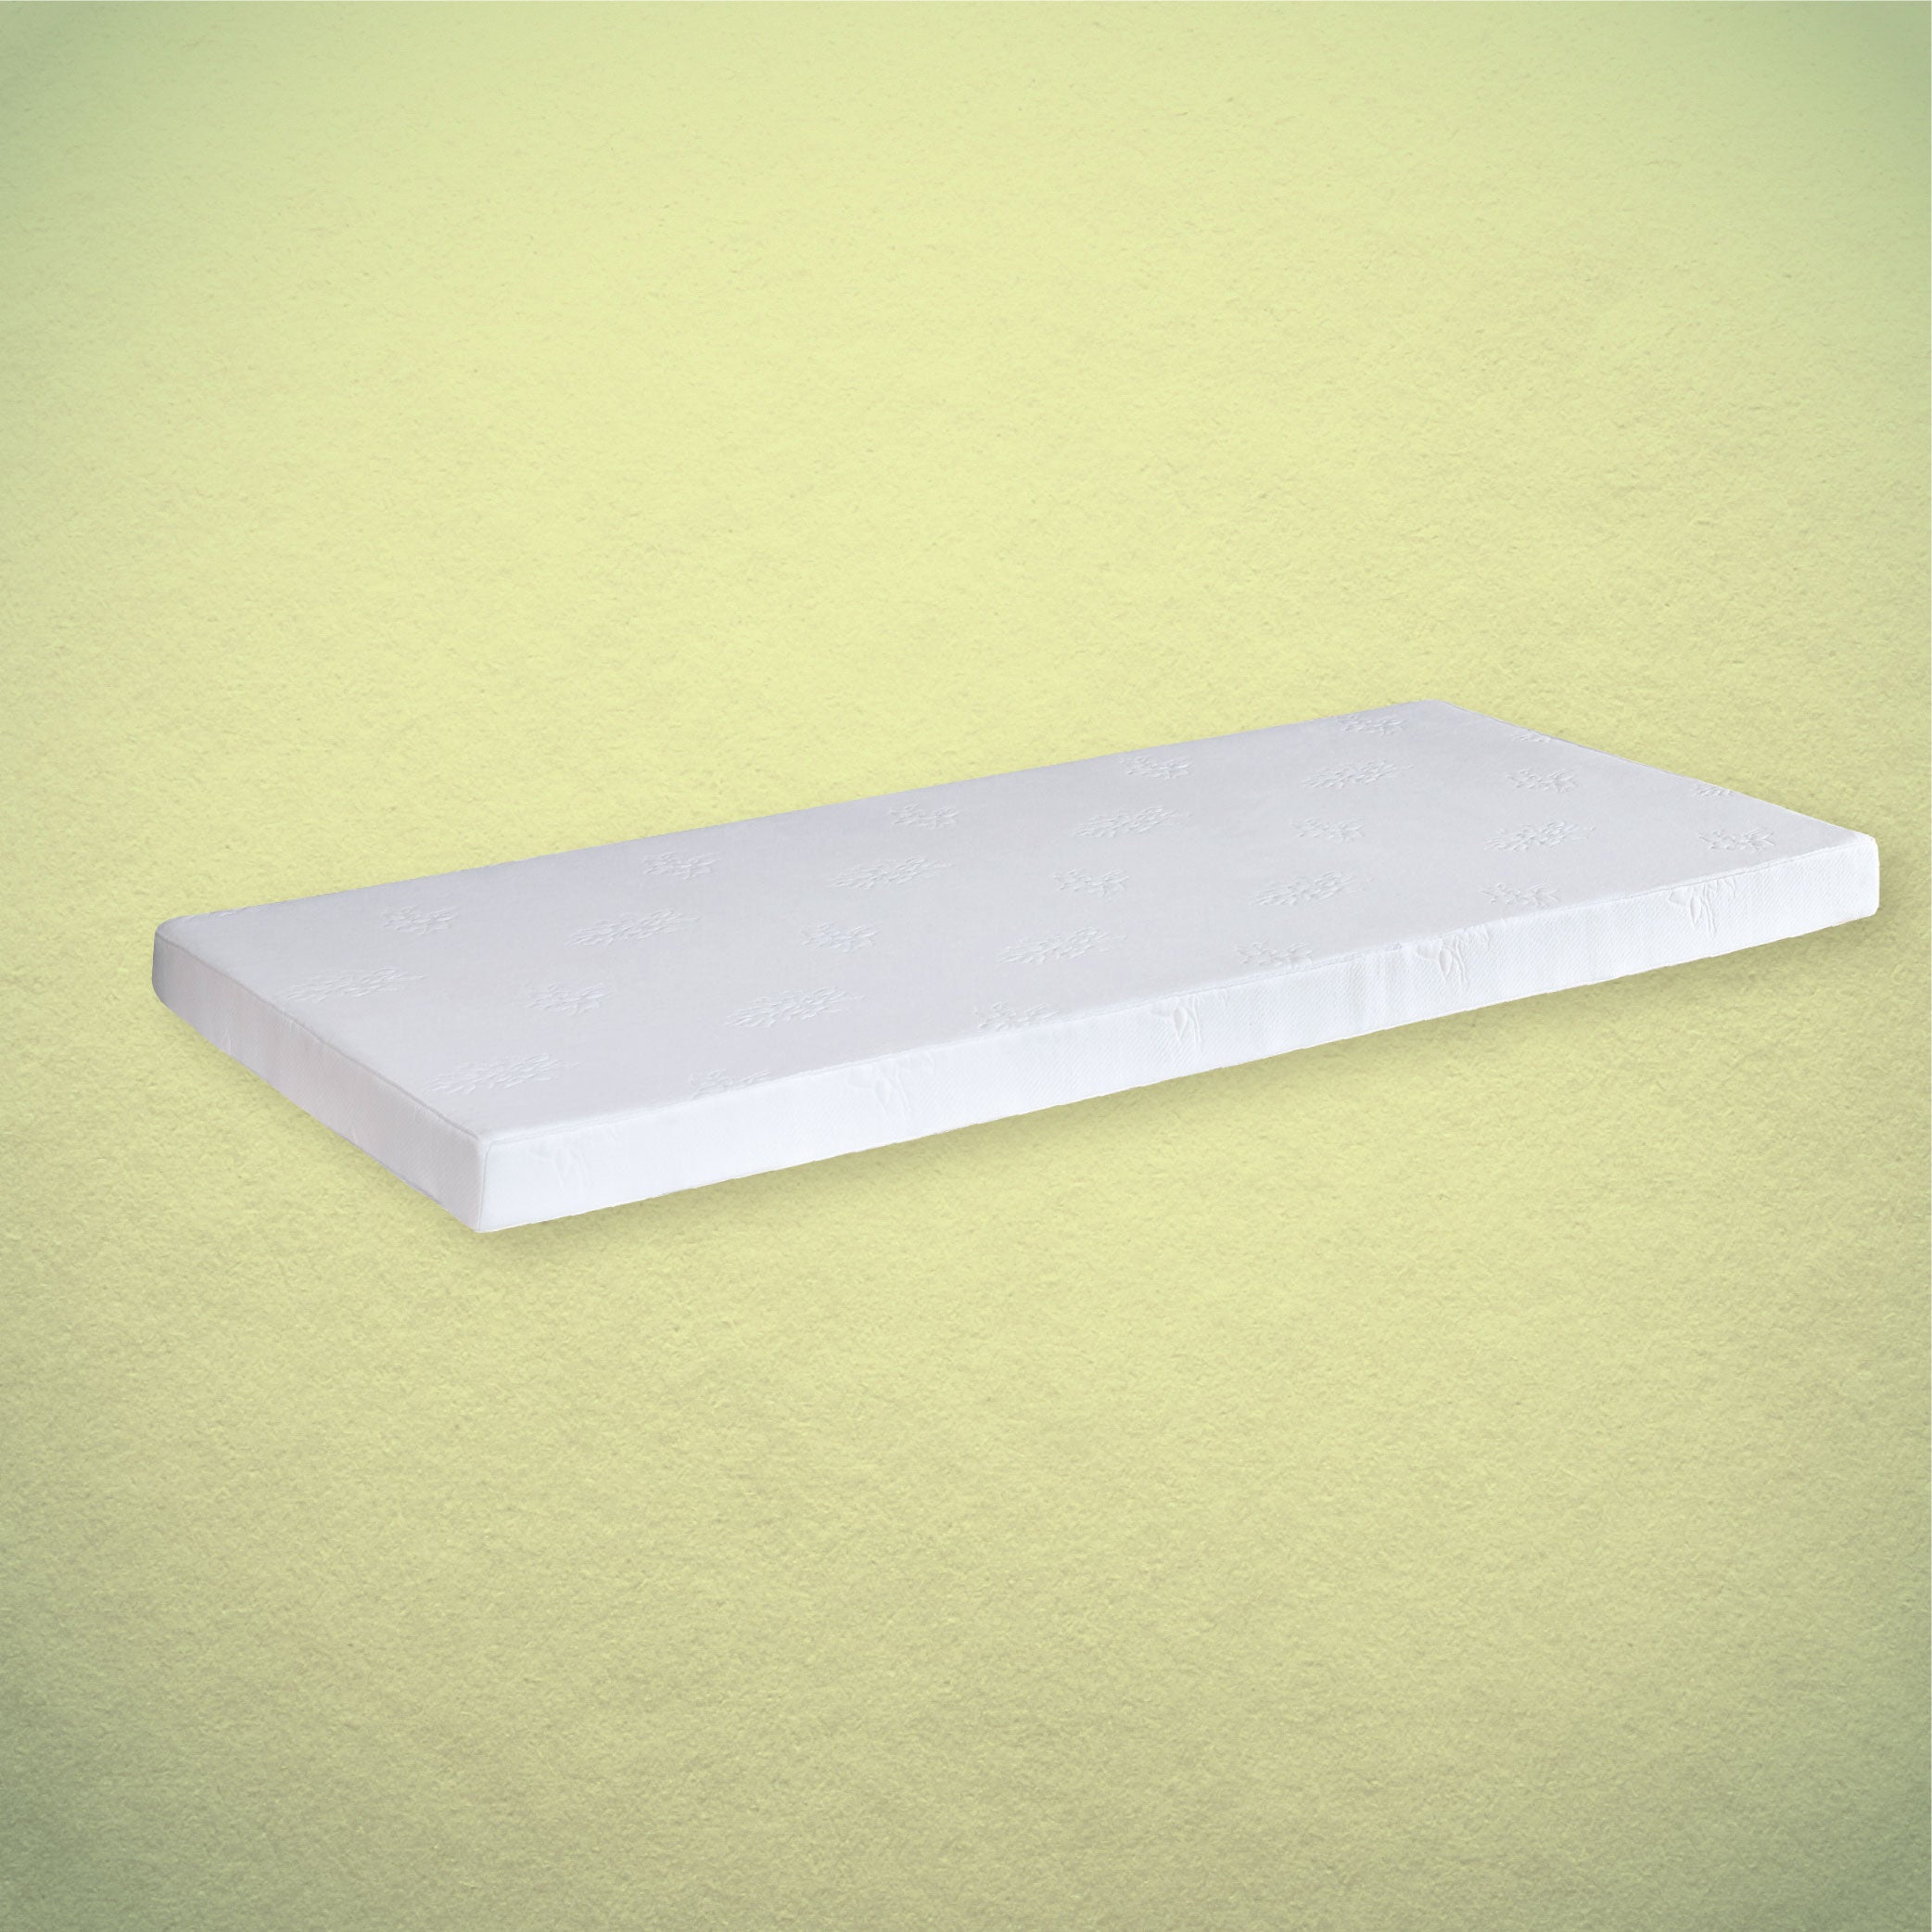 S-3 Comfort Mattress - Tailor-made size (Above 48" W)